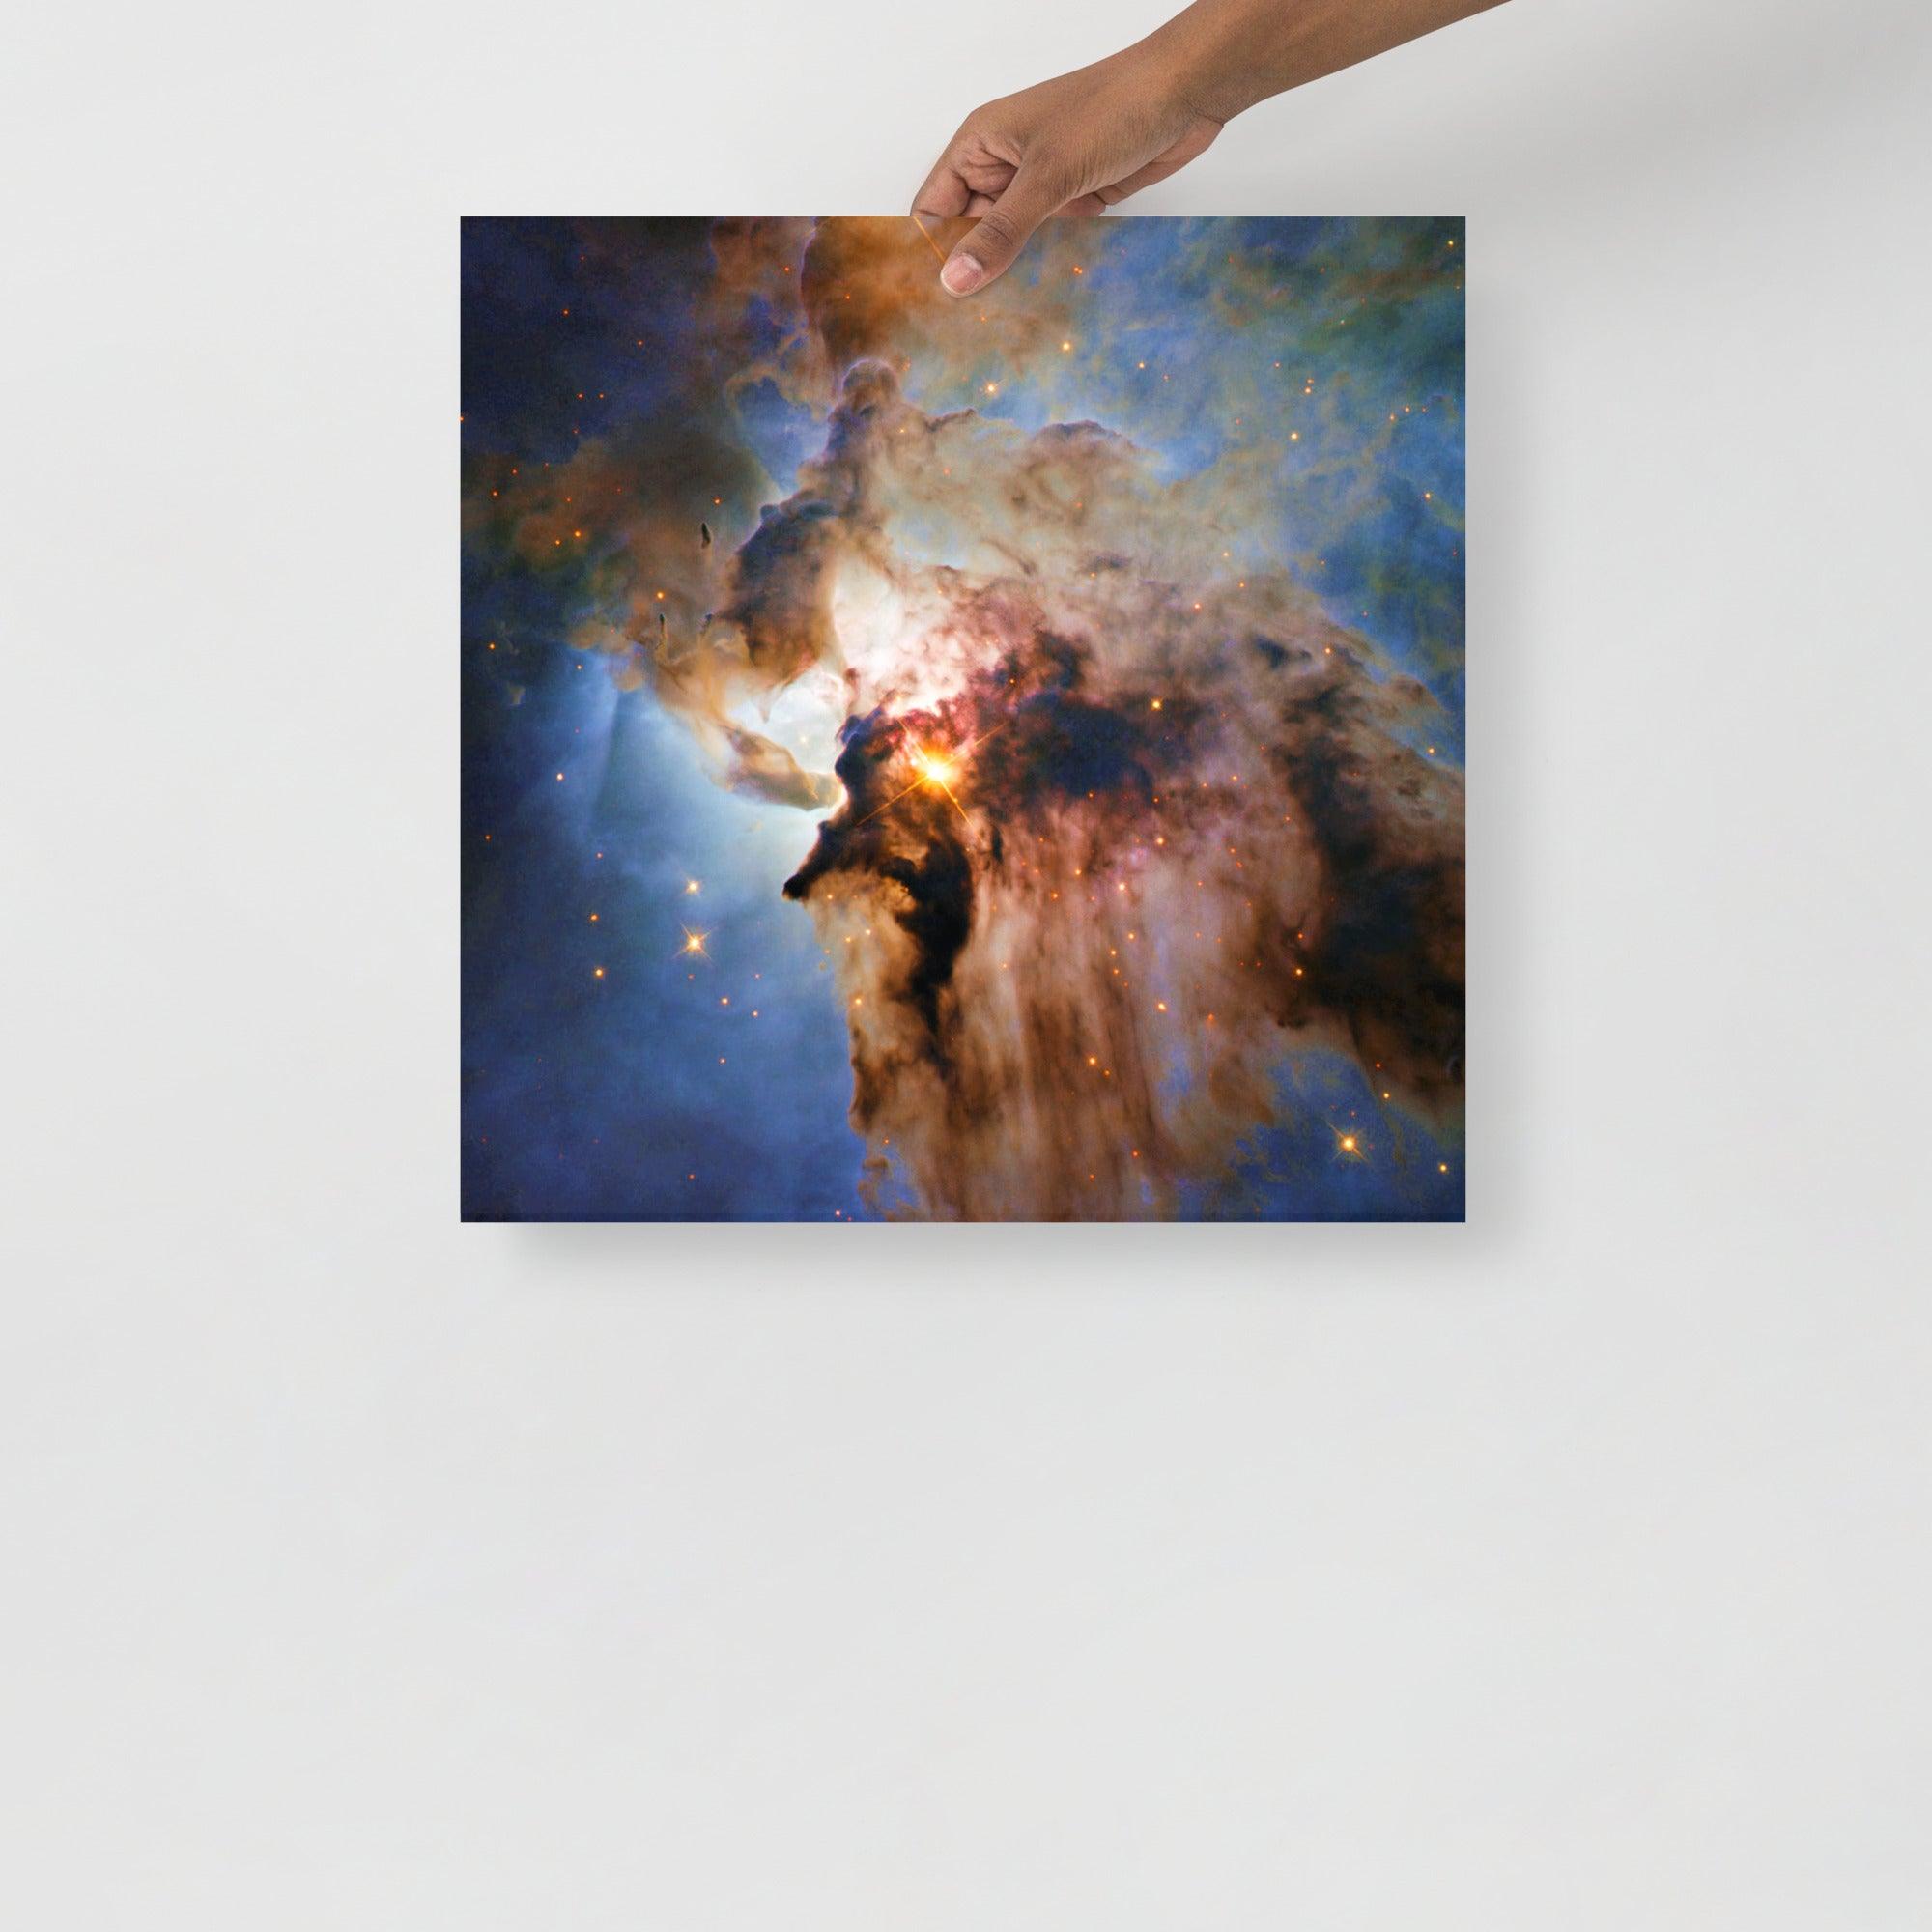 A Lagoon Nebula by Hubble Space Telescope poster on a plain backdrop in size 18x18”.